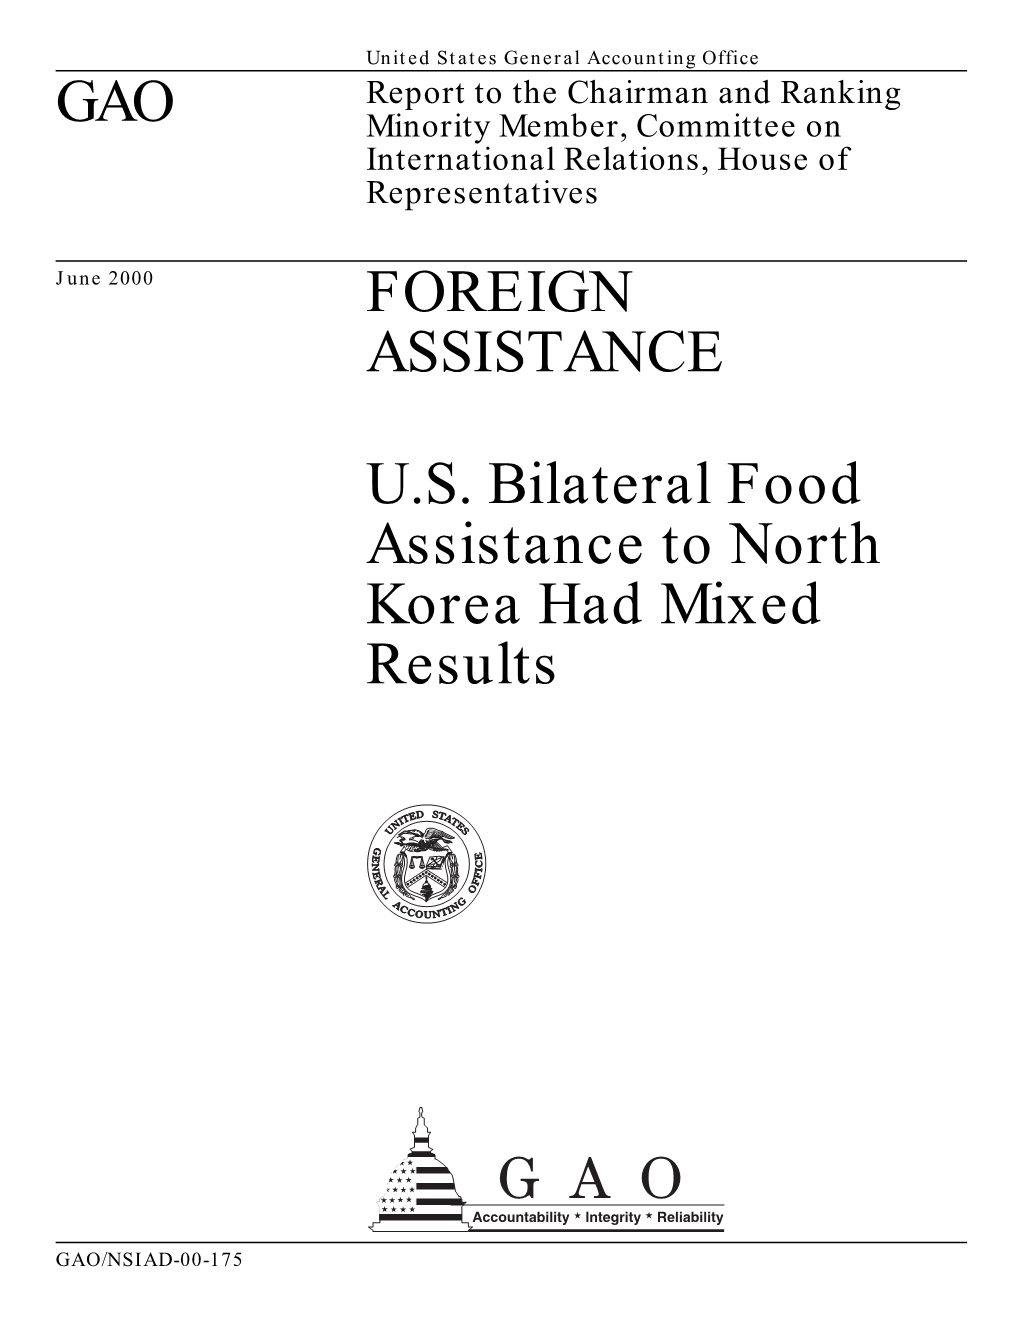 U.S. Bilateral Food Assistance to North Korea Had Mixed Results